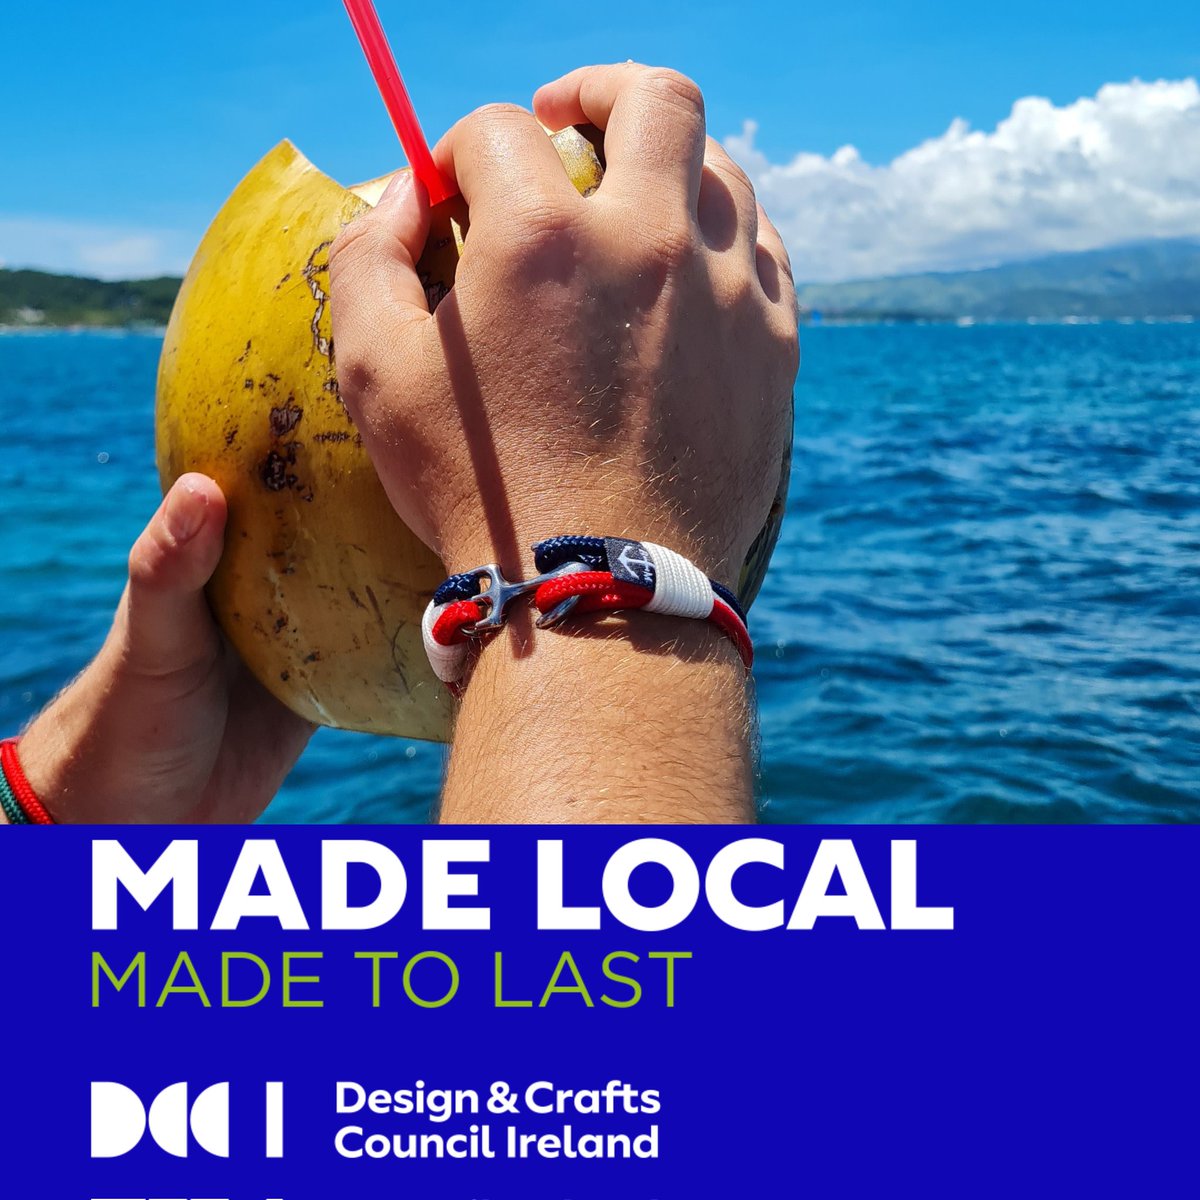 I am thrilled to participate in the @DCCI #MadeLocal #MadeToLast campaign, especially with my line of nautical bracelets. 🌊⚓️  Join me in celebrating Irish-made products that are built to last! 🍀💪 @DCCIreland